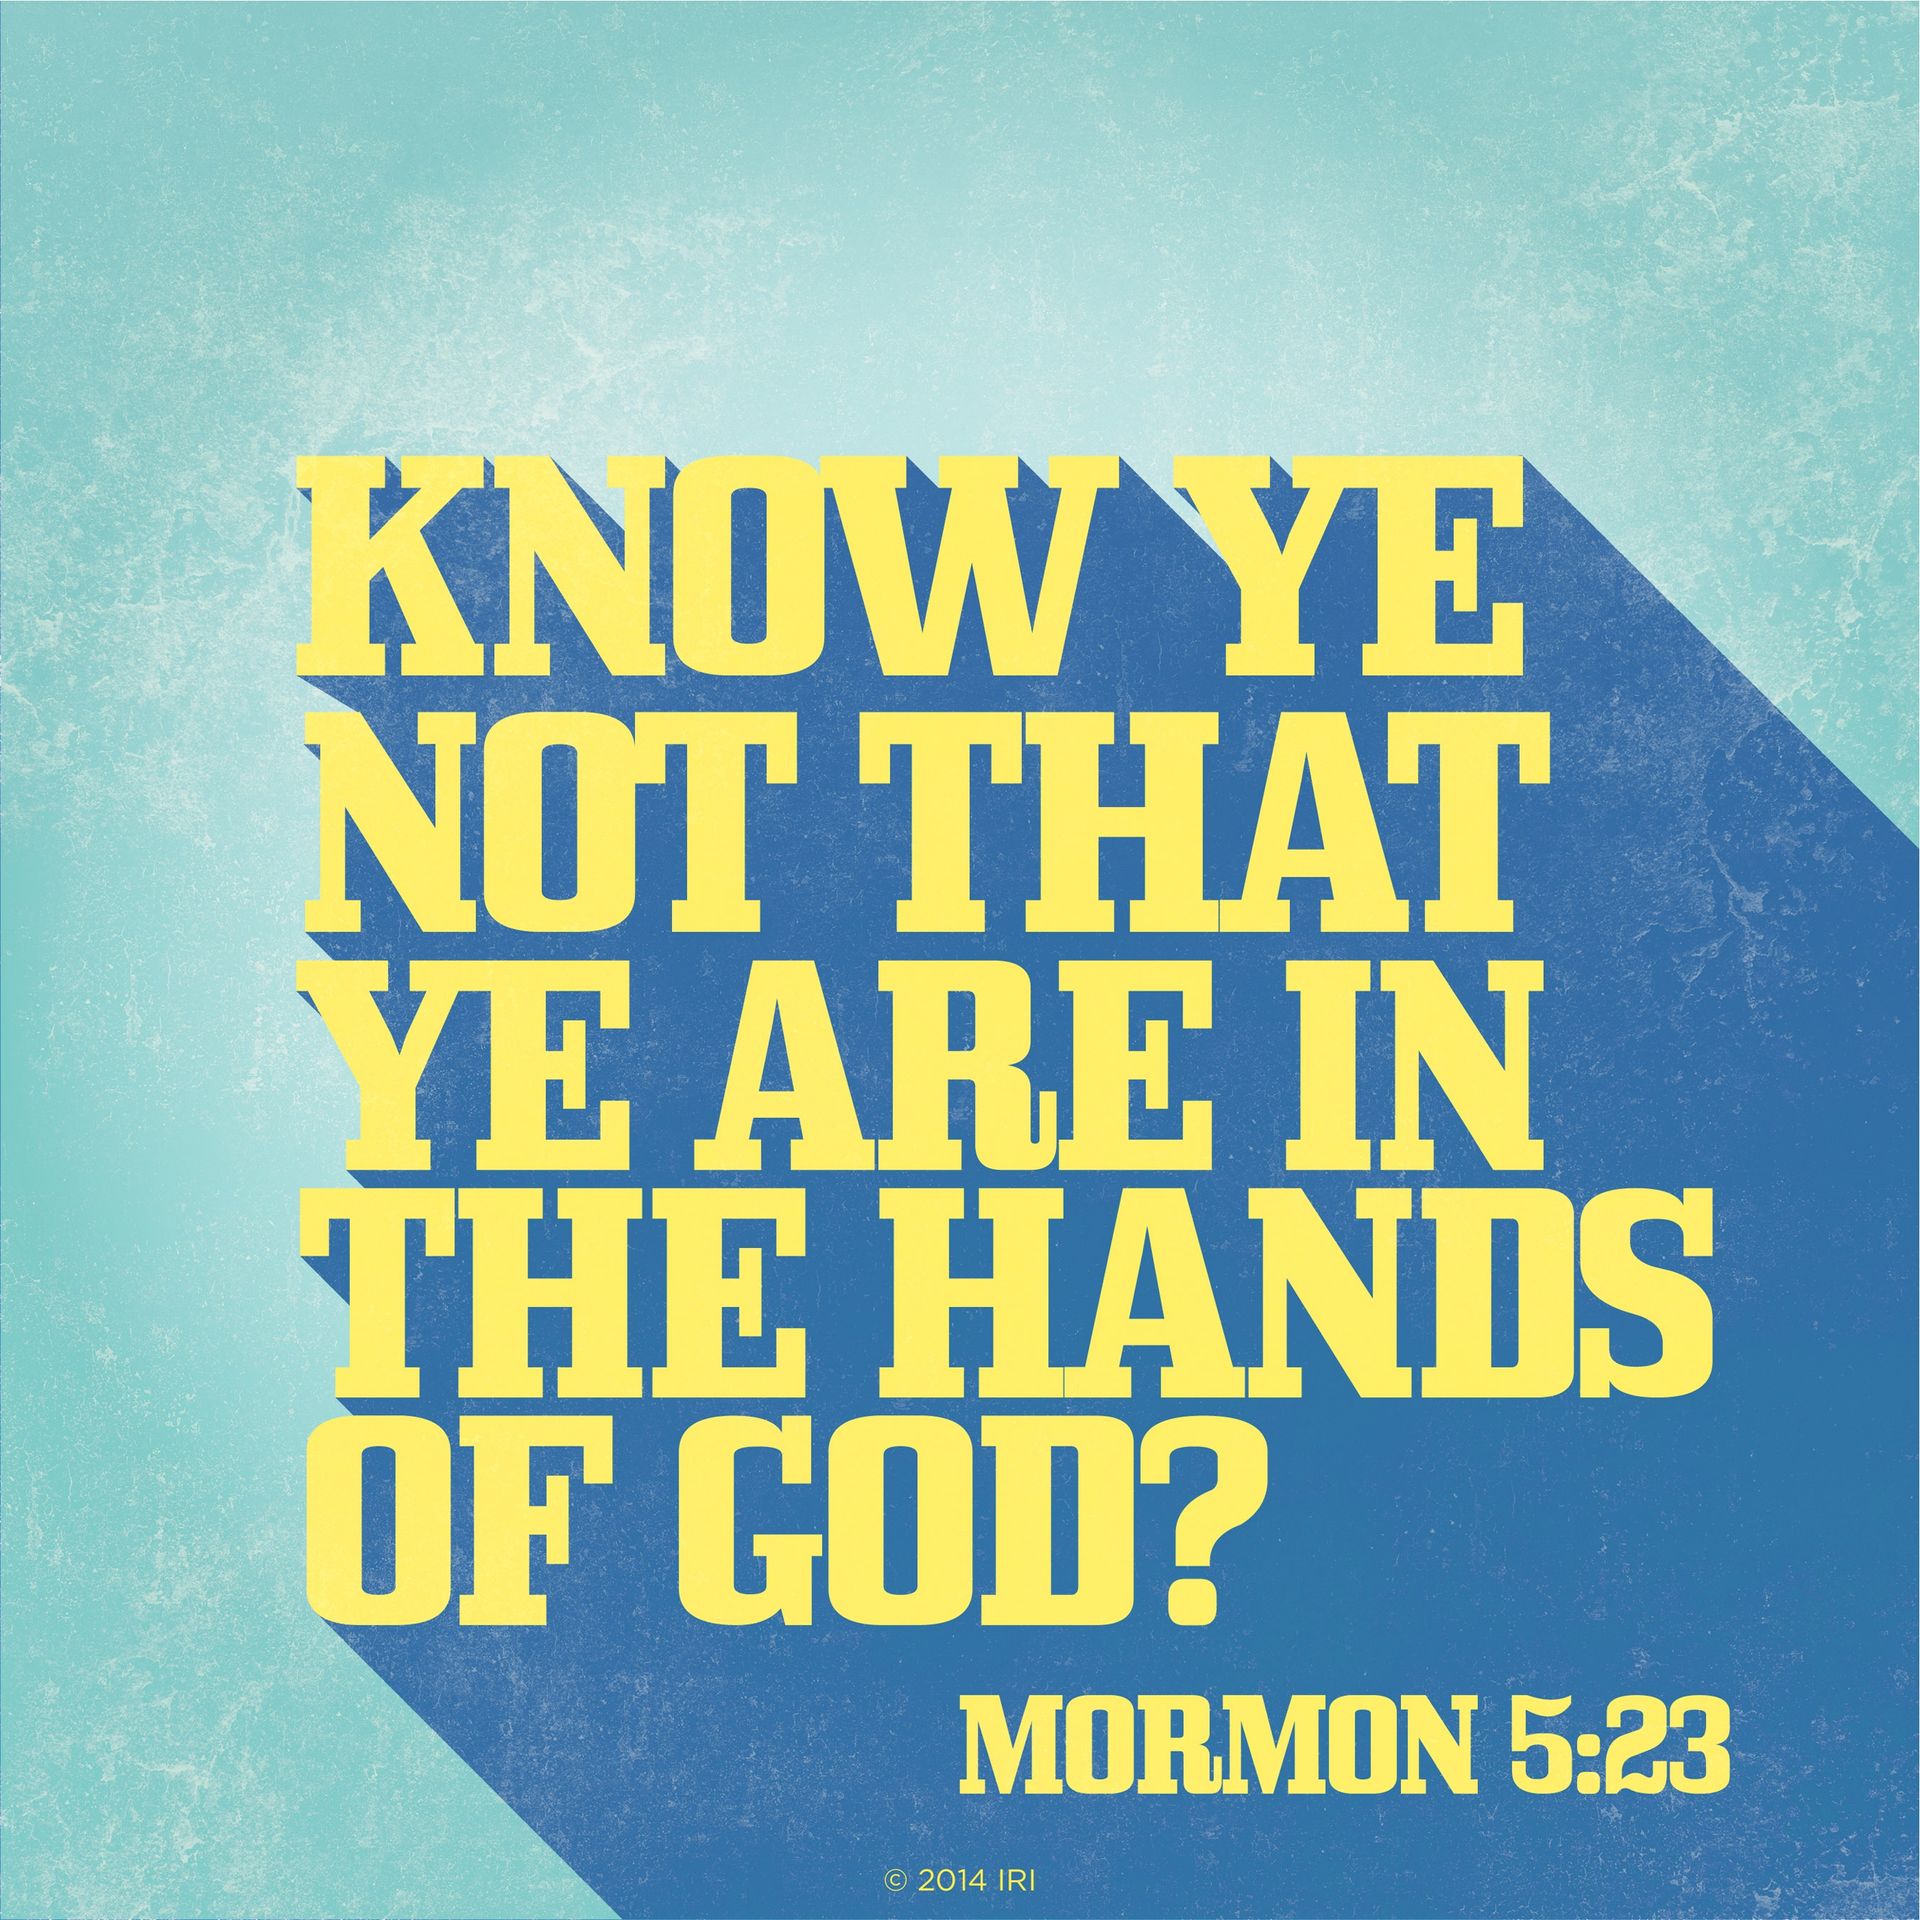 “Know ye not that ye are in the hands of God?”—Mormon 5:23